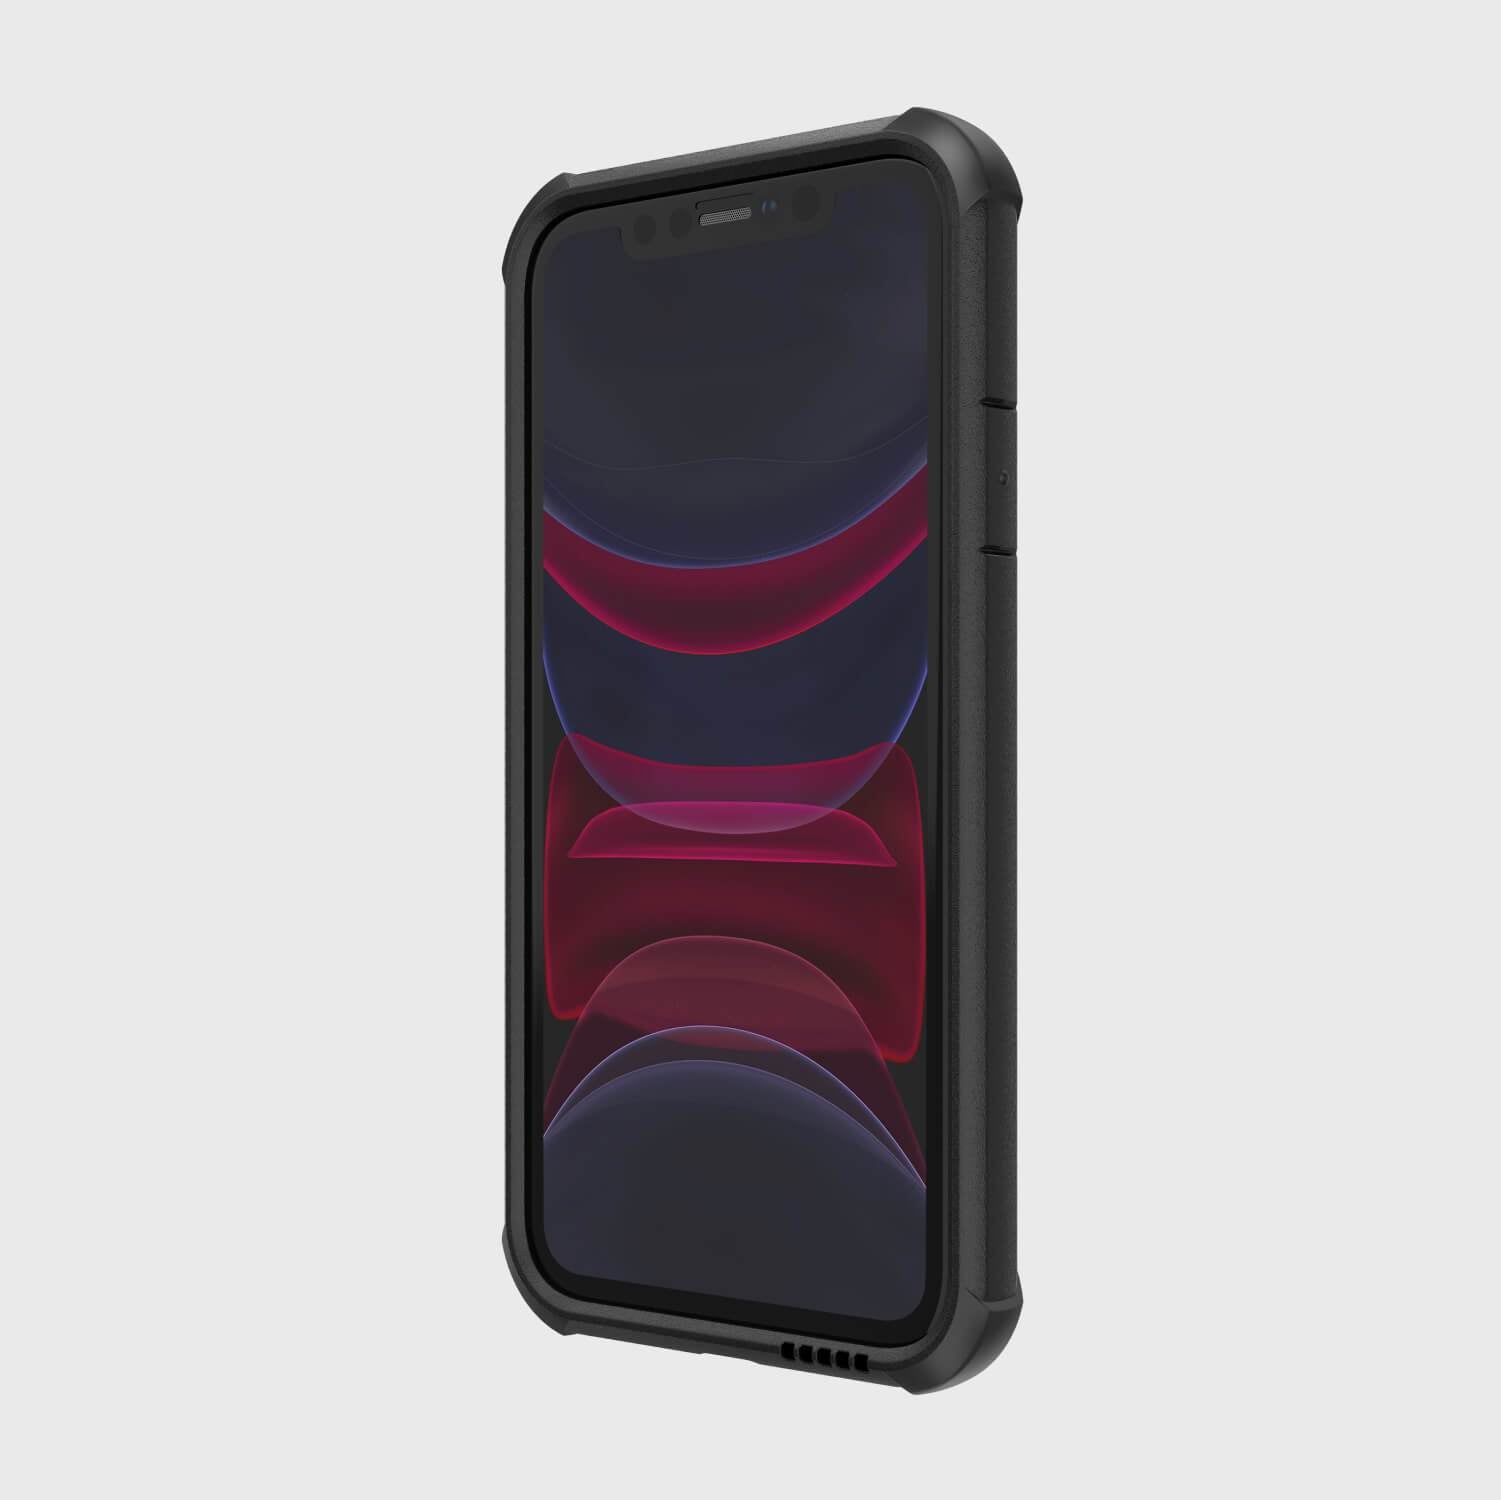 The protective iPhone 11 Pro Case - TACTICAL by Raptic is shown on a white background.